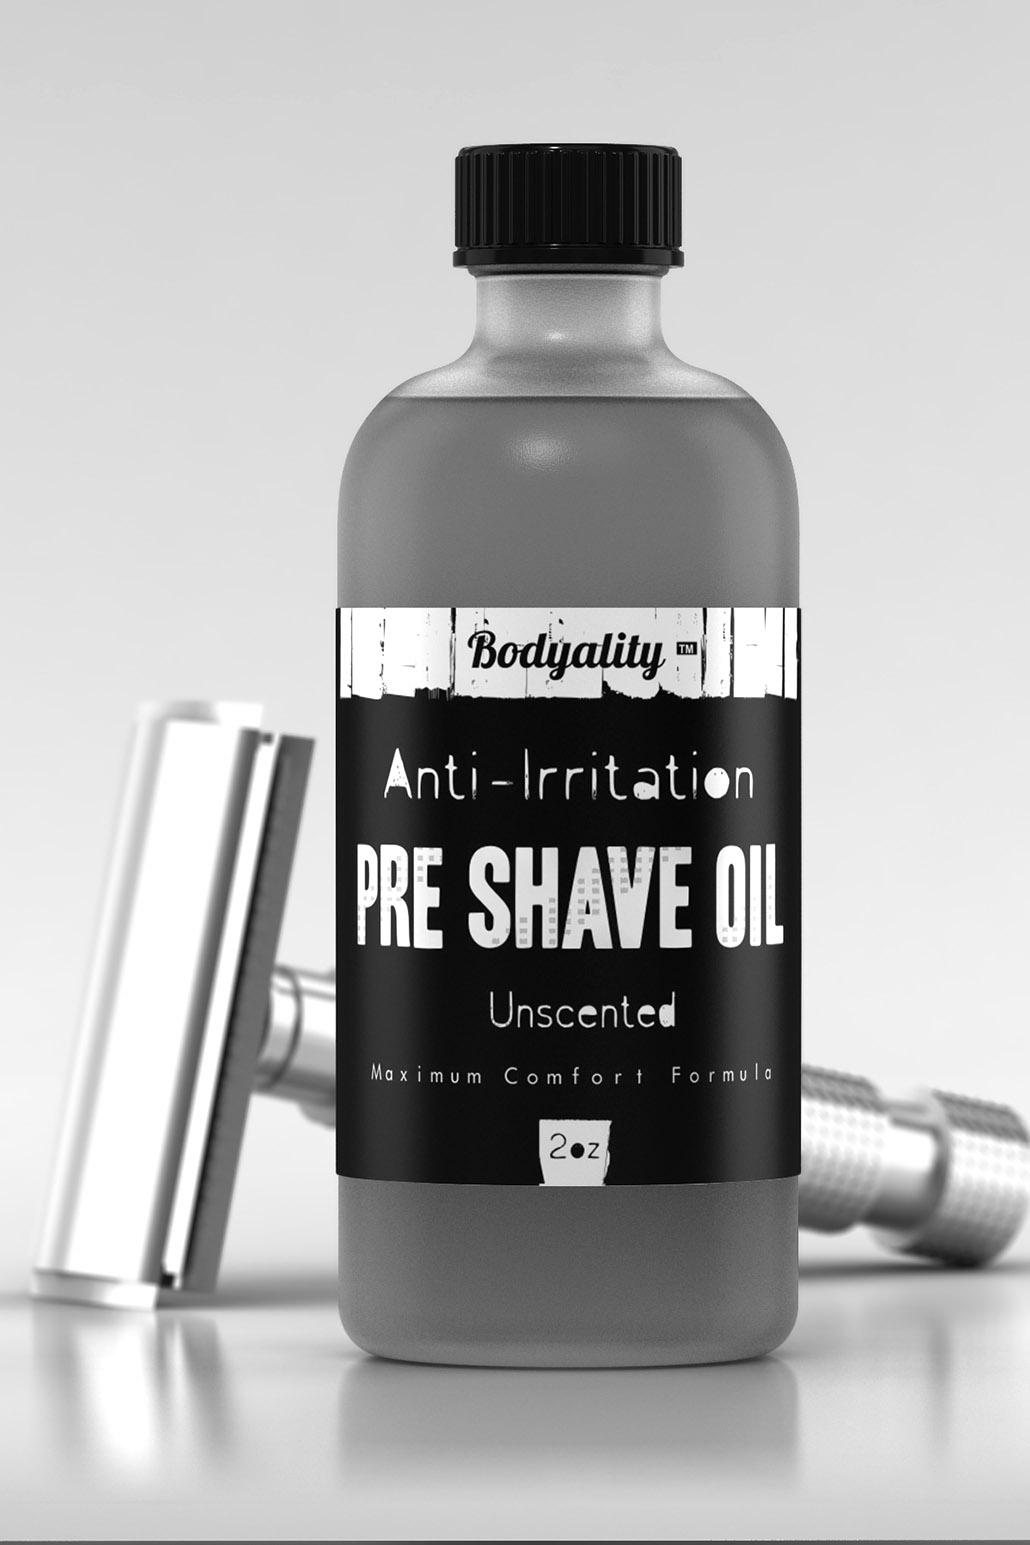 Pre Shave Oil, Label design and 3D modelling and rendering for Amazon presentation